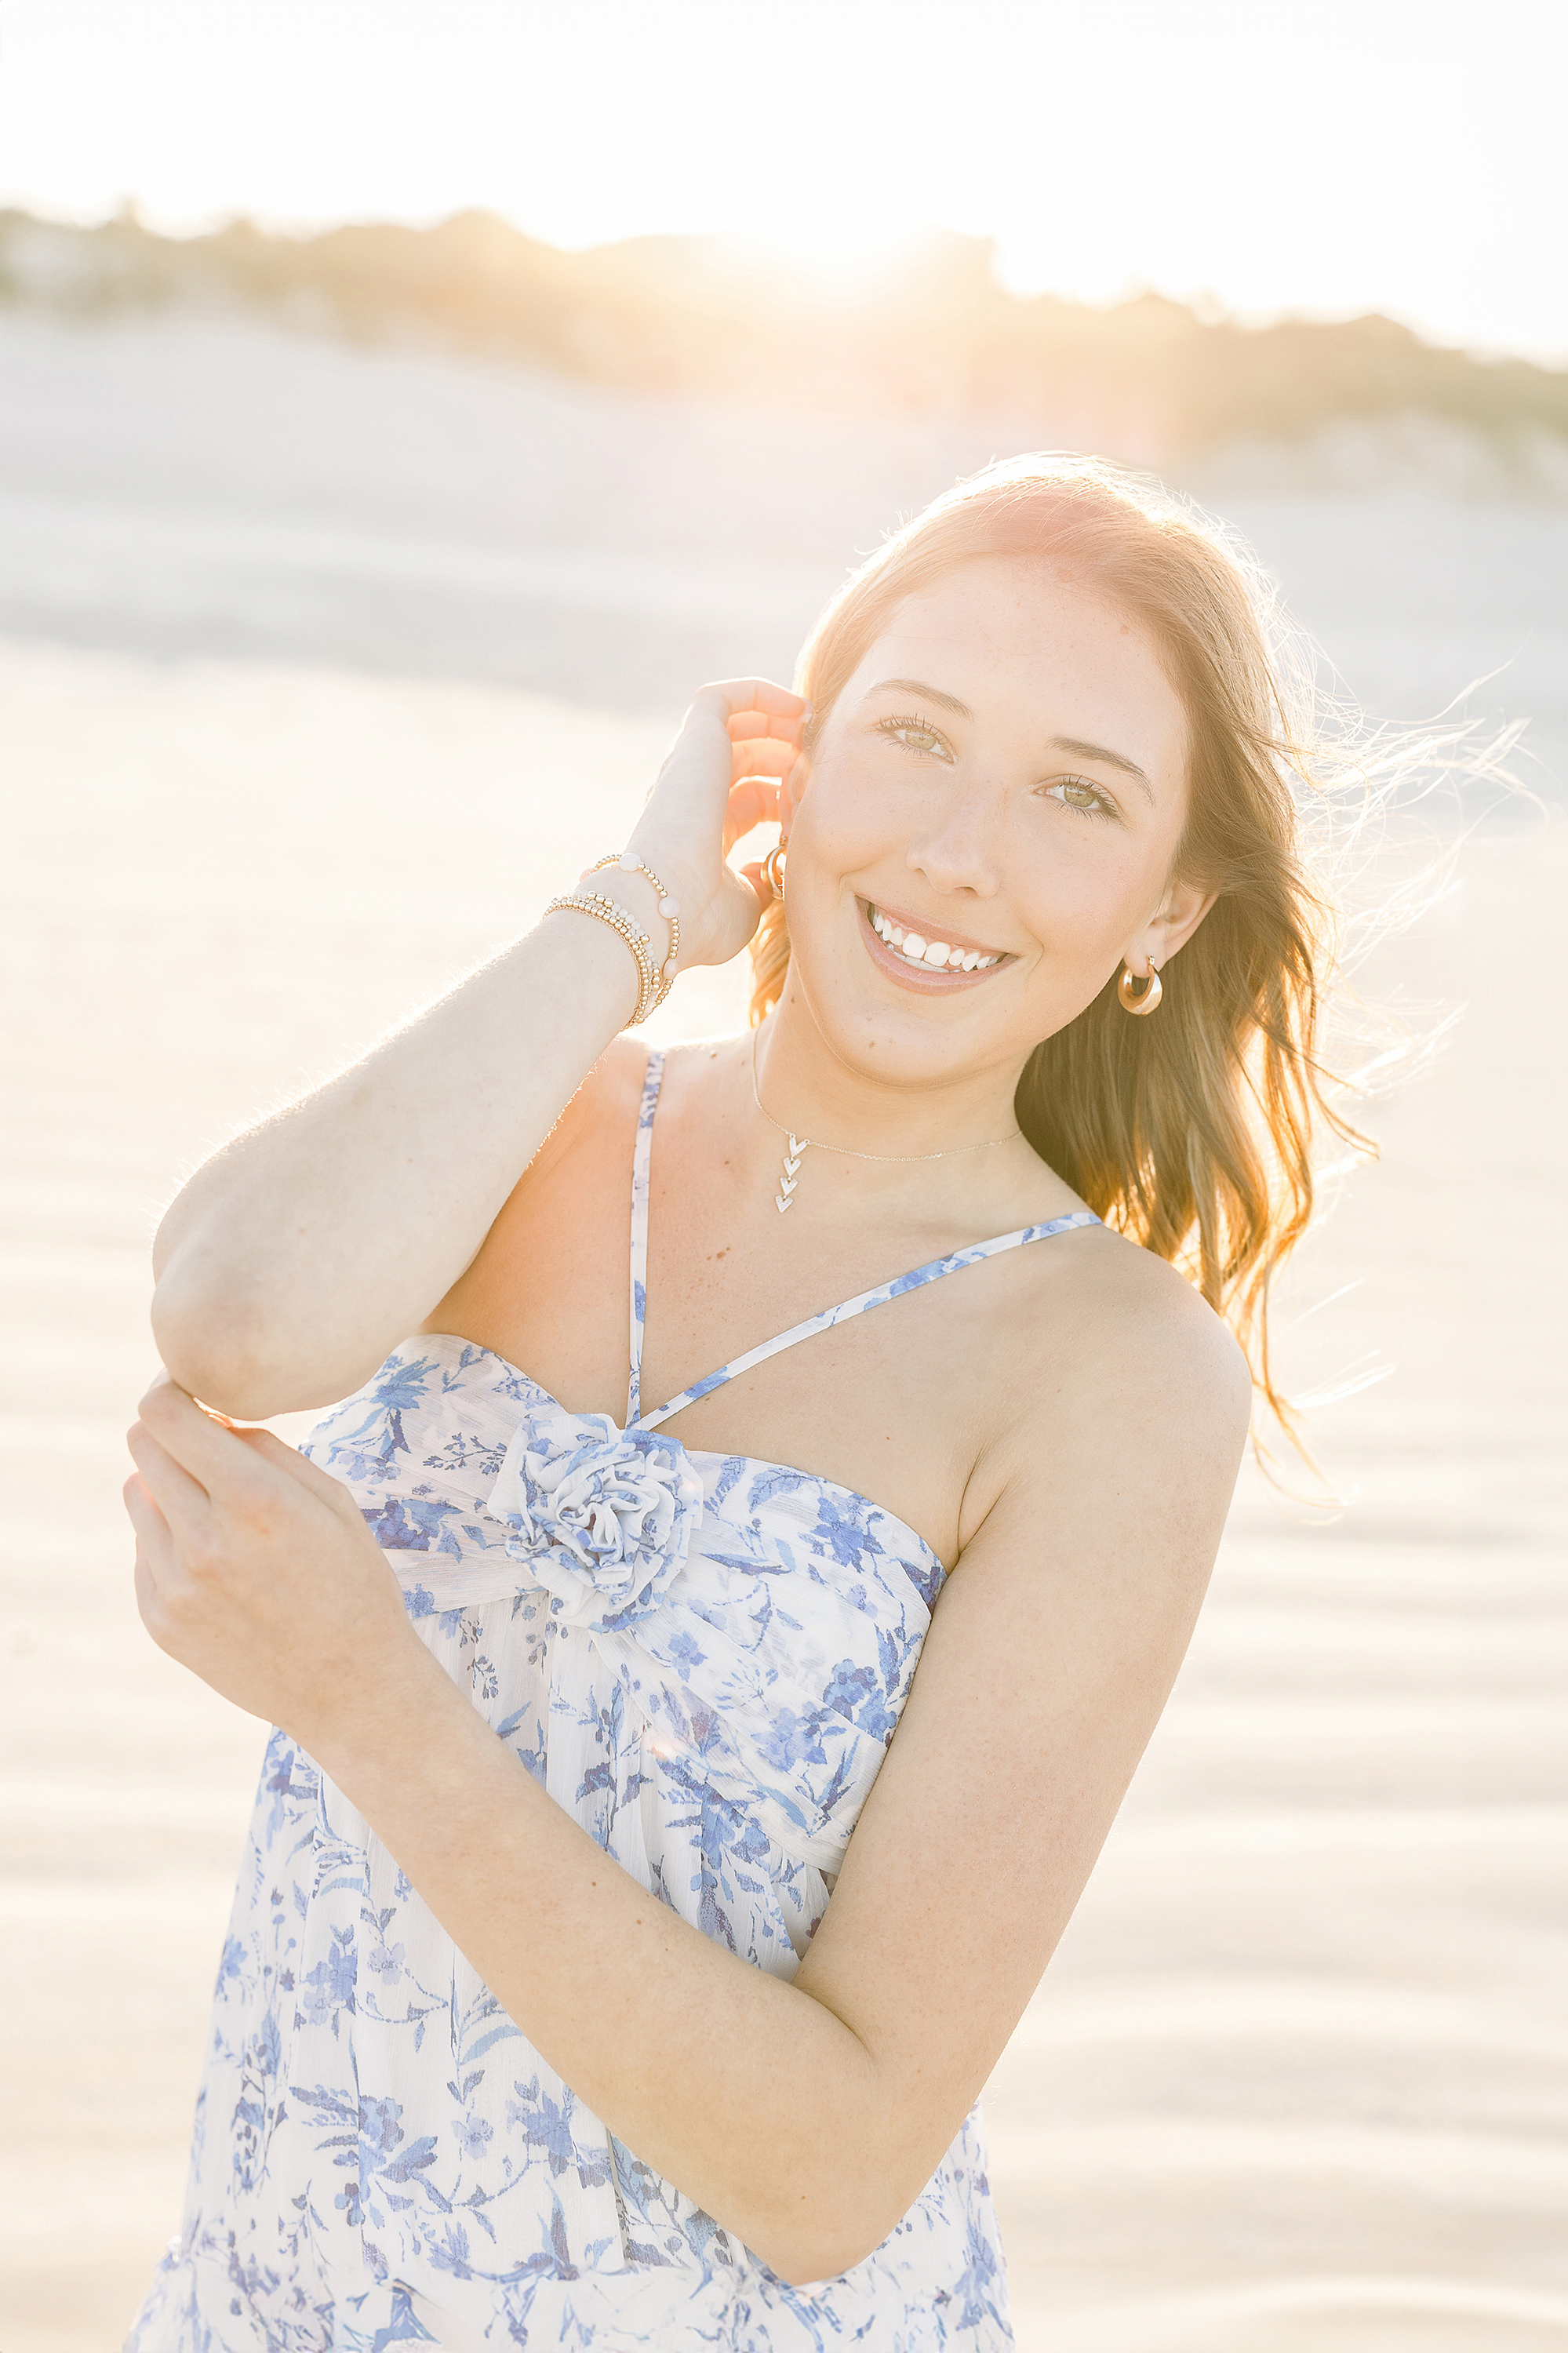 Backlit grad portrait of a young woman in a blue floral dress on the beach at sunset.